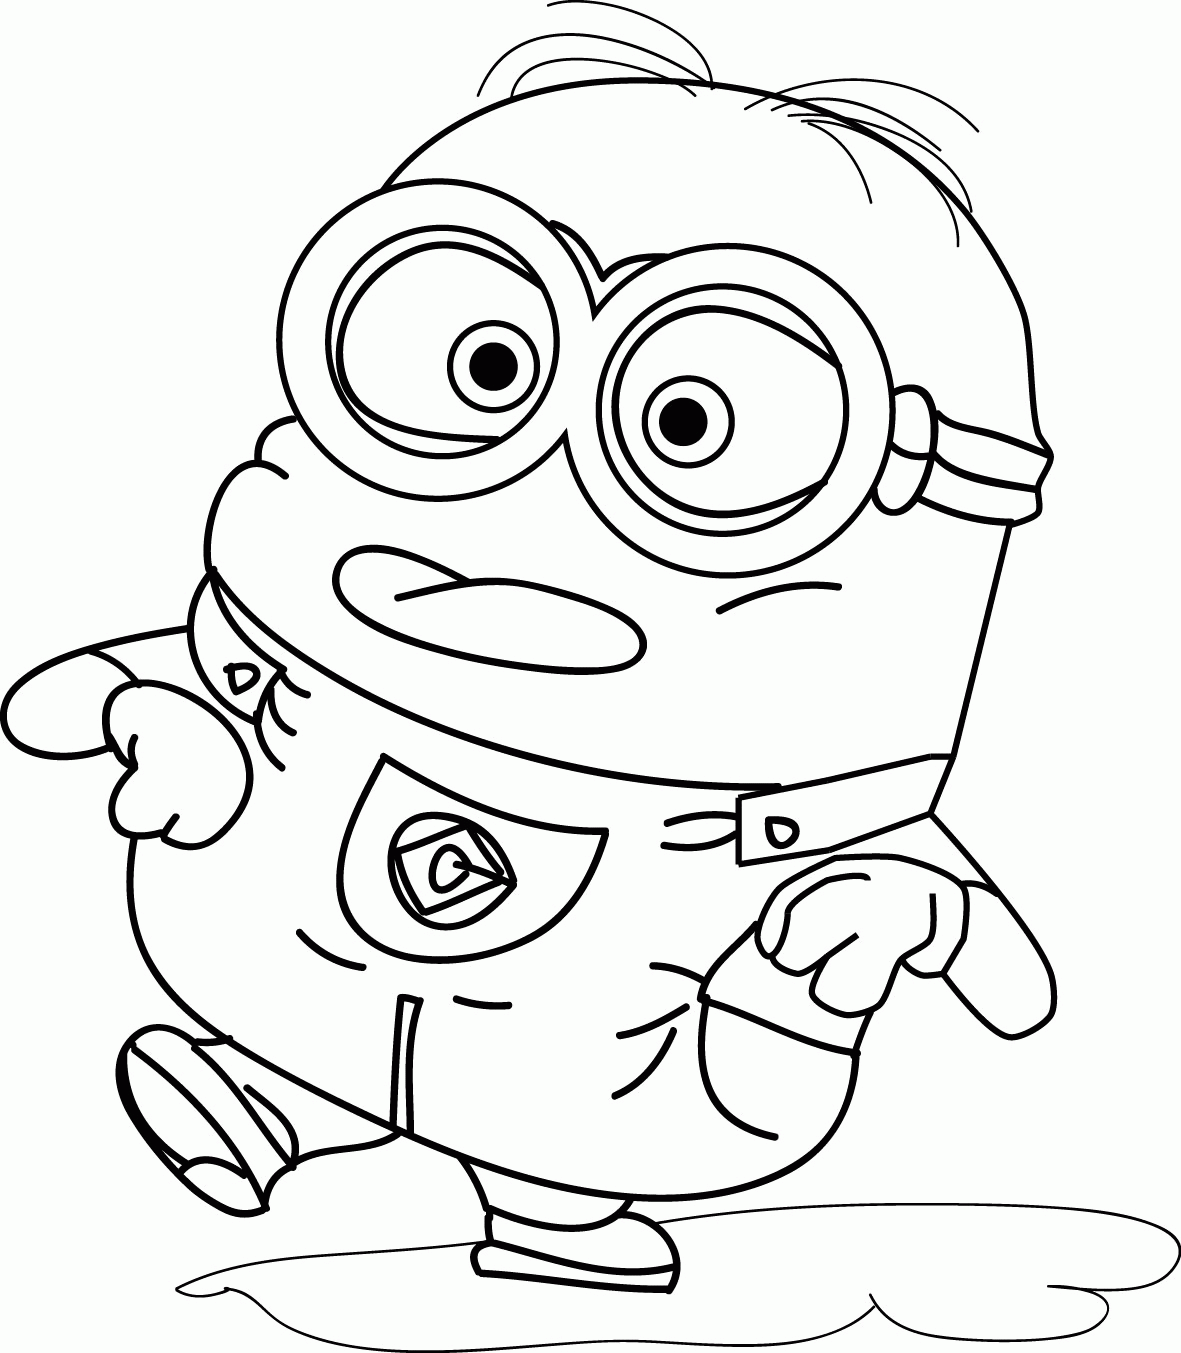 Minion Coloring Pages - Dr. Odd